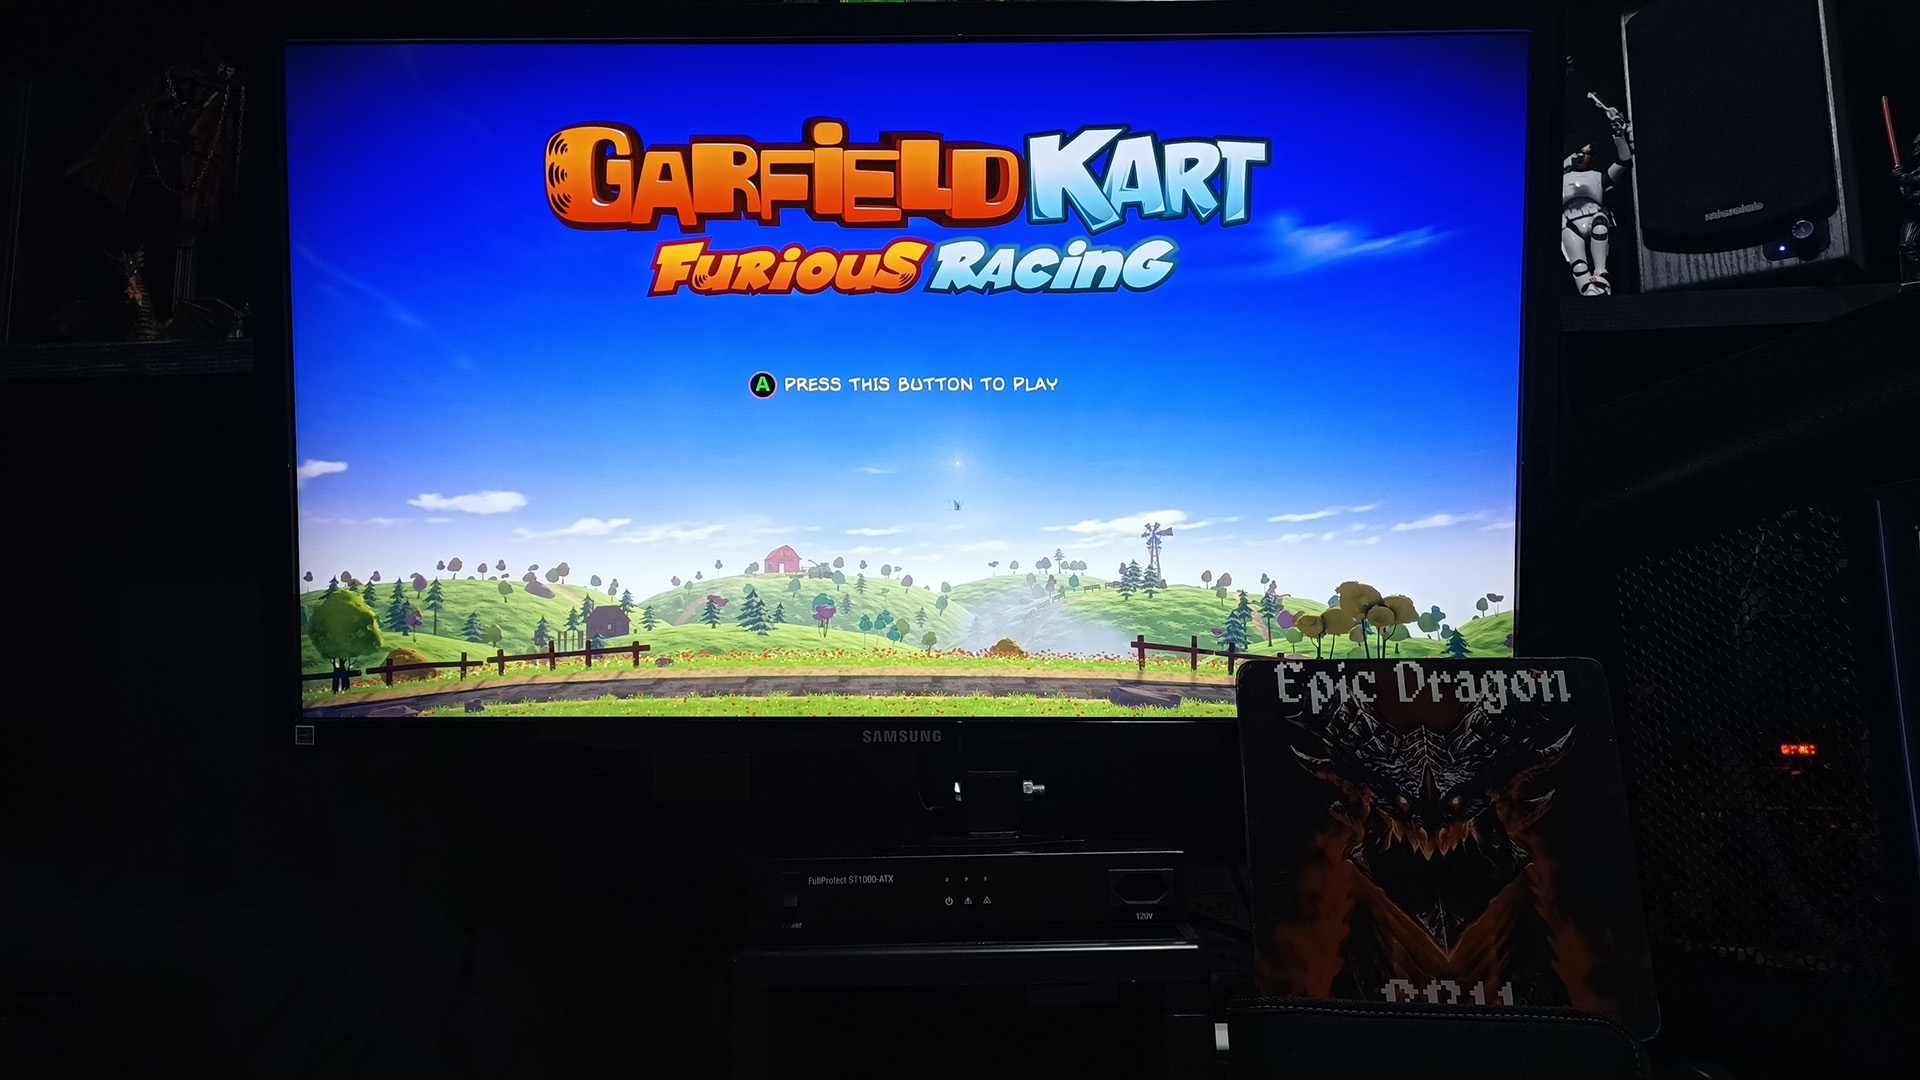 EpicDragon: Garfield Kart Furious Racing: Crazy Dunes [Time Trial: 3 Laps] (PC) 0:01:28.303 points on 2022-08-08 21:25:36